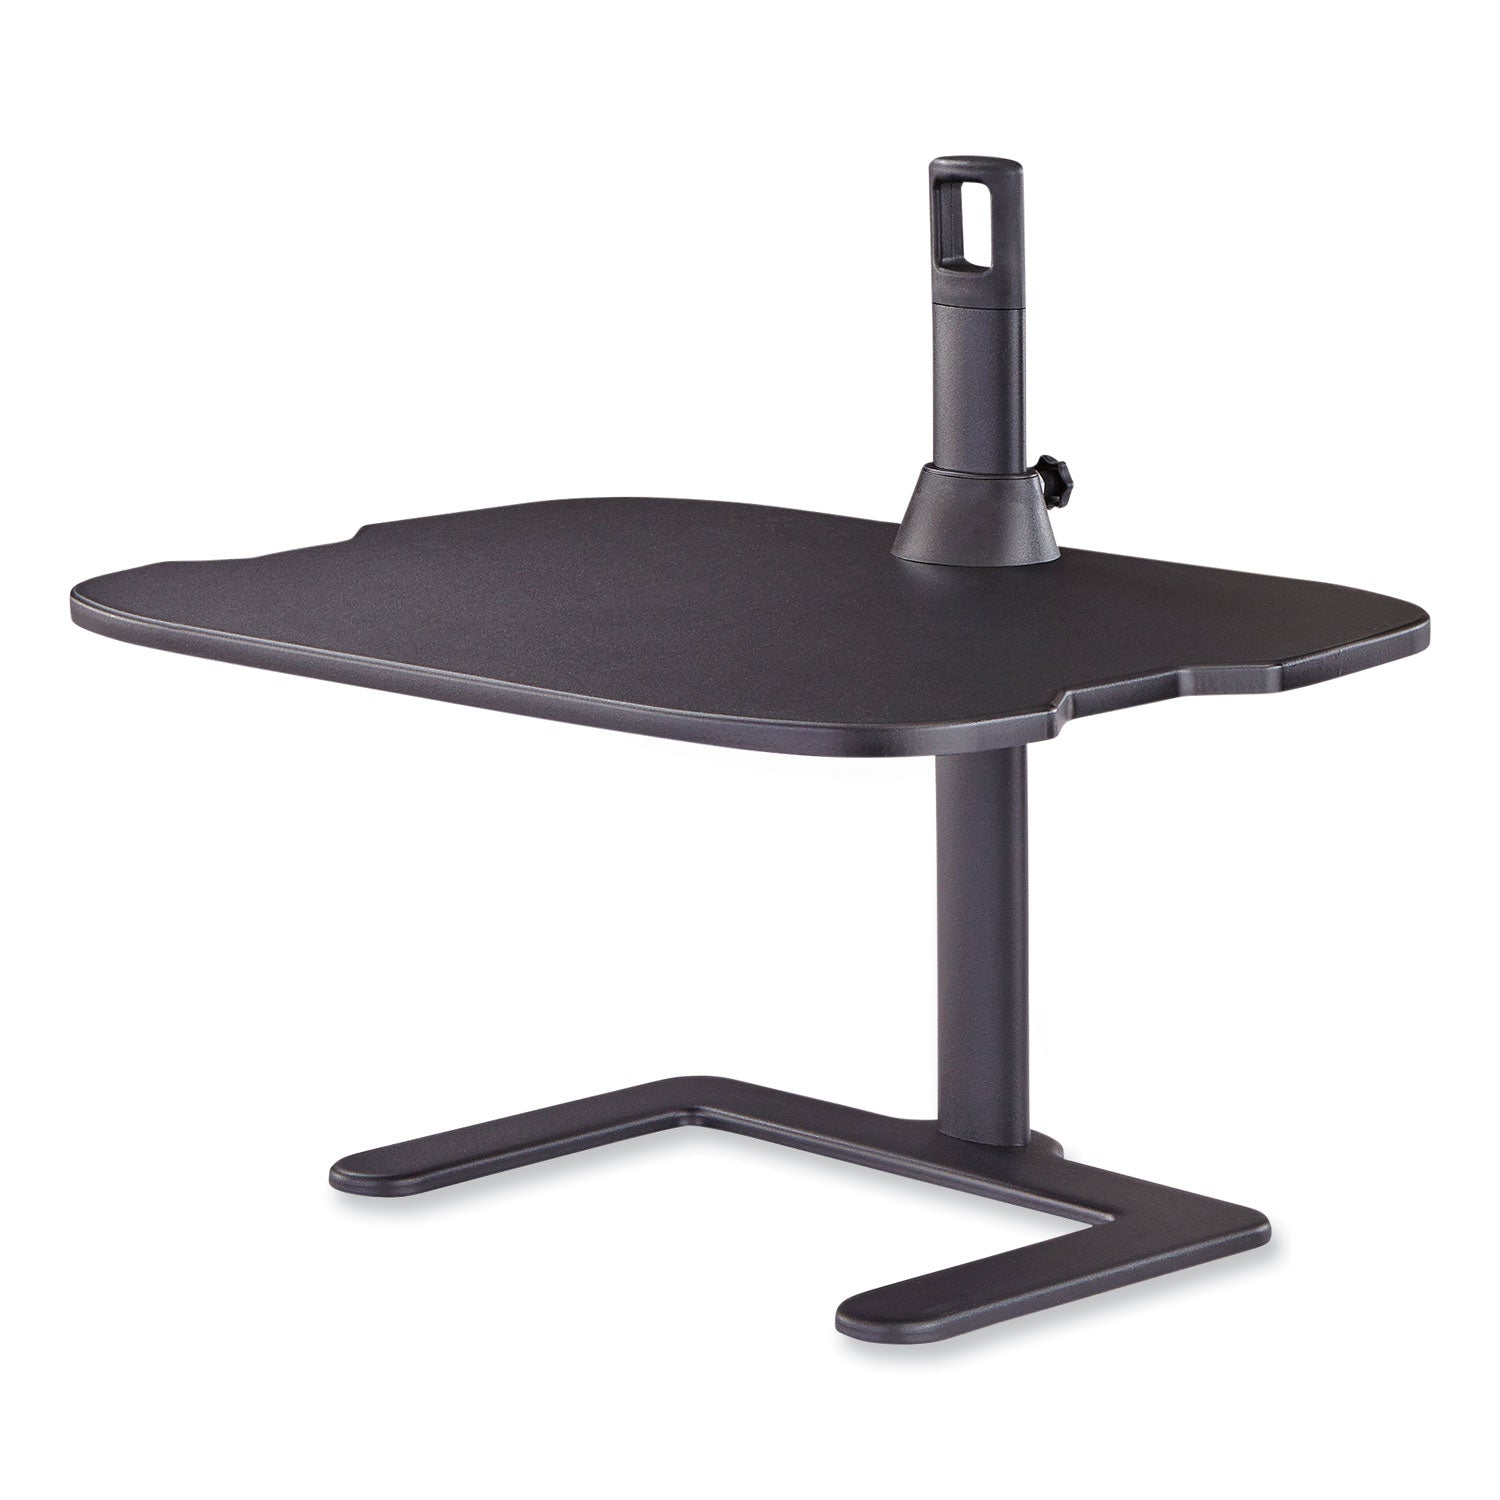 stance-height-adjustable-laptop-stand-269-x-18-x-125-to-1575-black-supports-15-lbs-ships-in-1-3-business-days_saf2180bl - 2